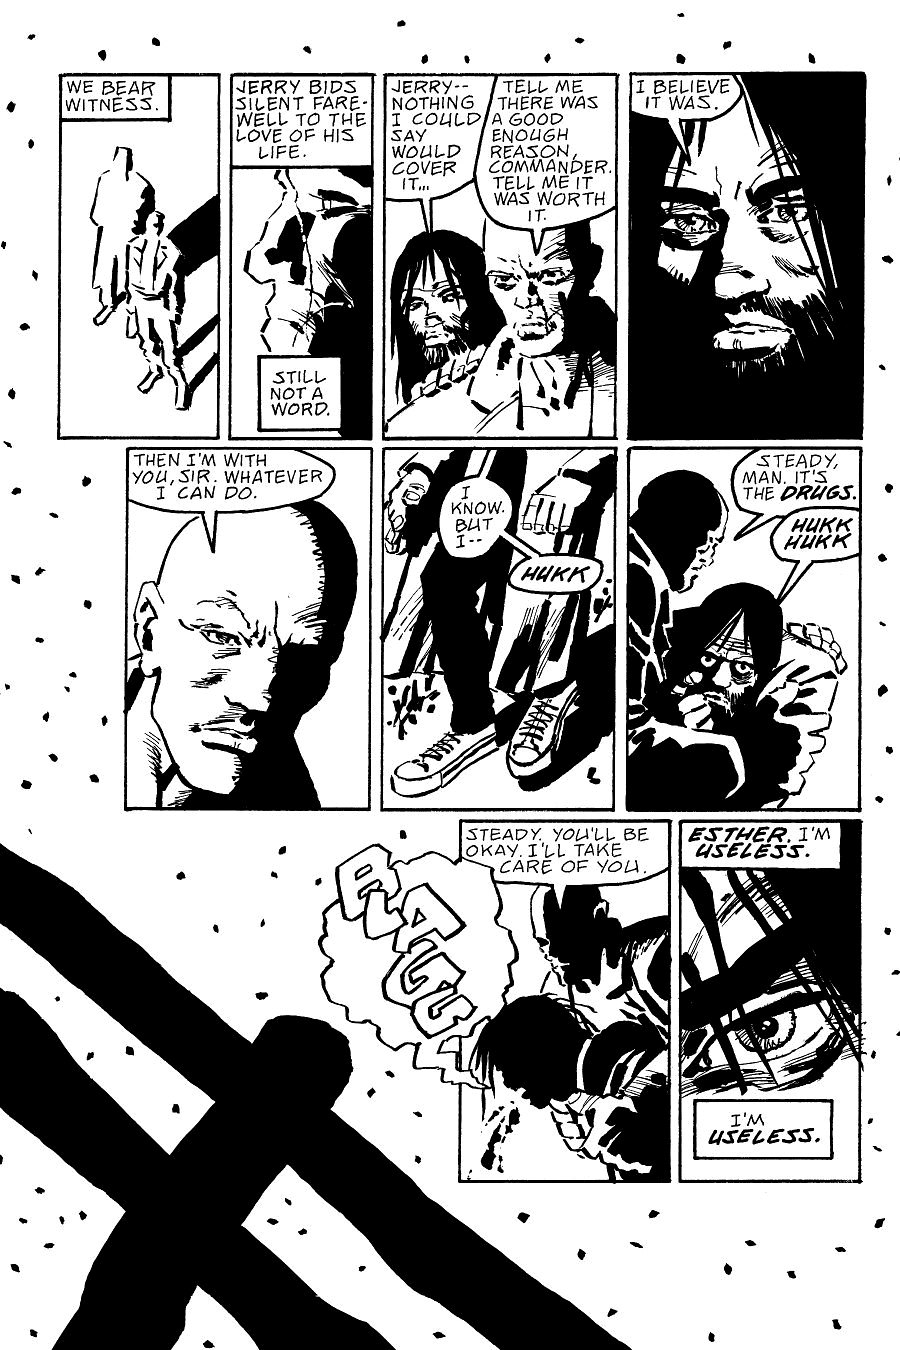 page 221 of sin city 7 hell and back